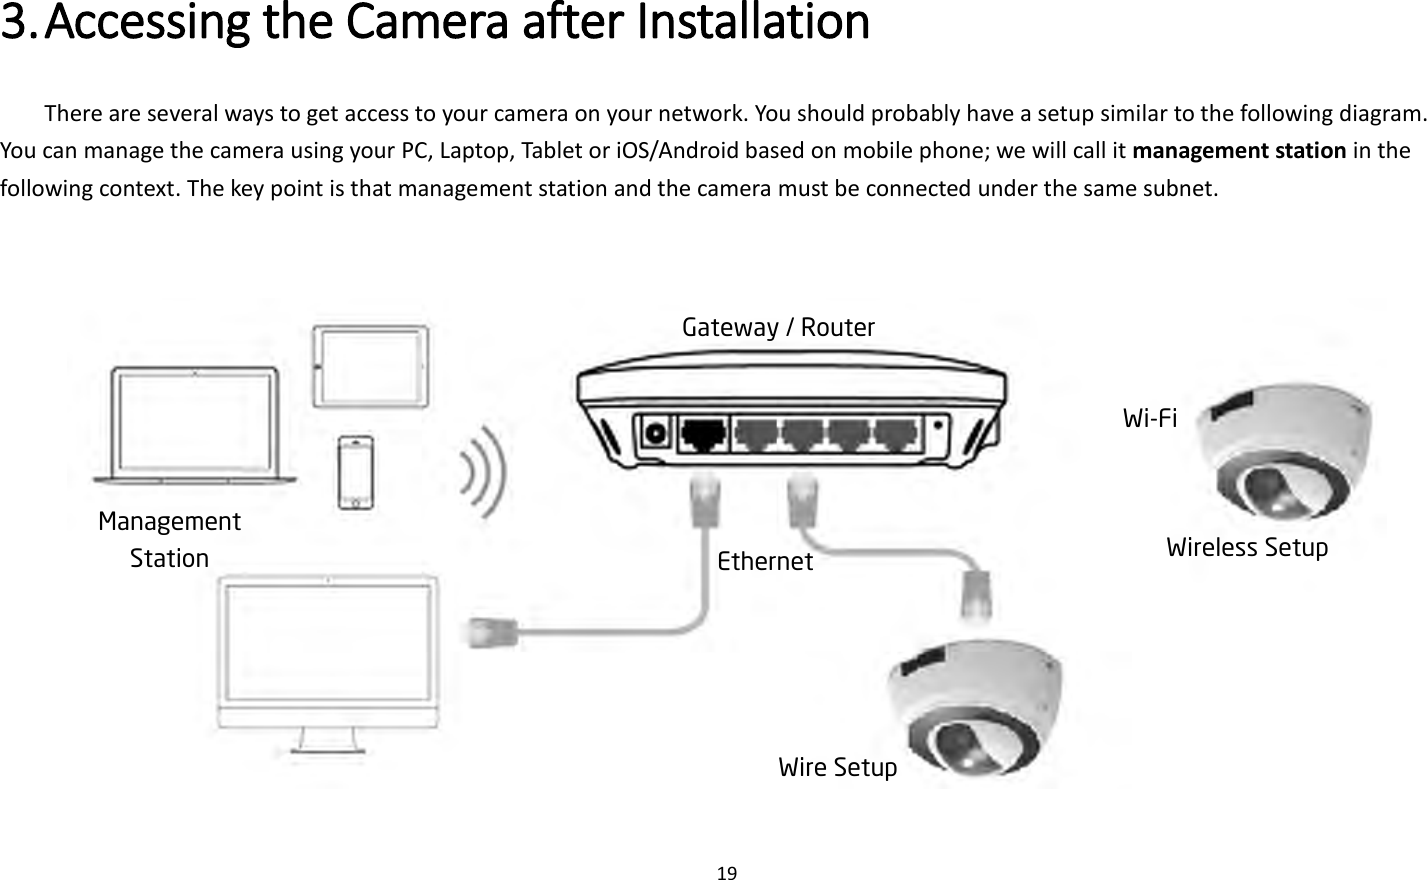 19  3. Accessing the Camera after Installation There are several ways to get access to your camera on your network. You should probably have a setup similar to the following diagram. You can manage the camera using your PC, Laptop, Tablet or iOS/Android based on mobile phone; we will call it management station in the following context. The key point is that management station and the camera must be connected under the same subnet.    Management Station Gateway / Router Ethernet Wi-Fi Wire Setup Wireless Setup 